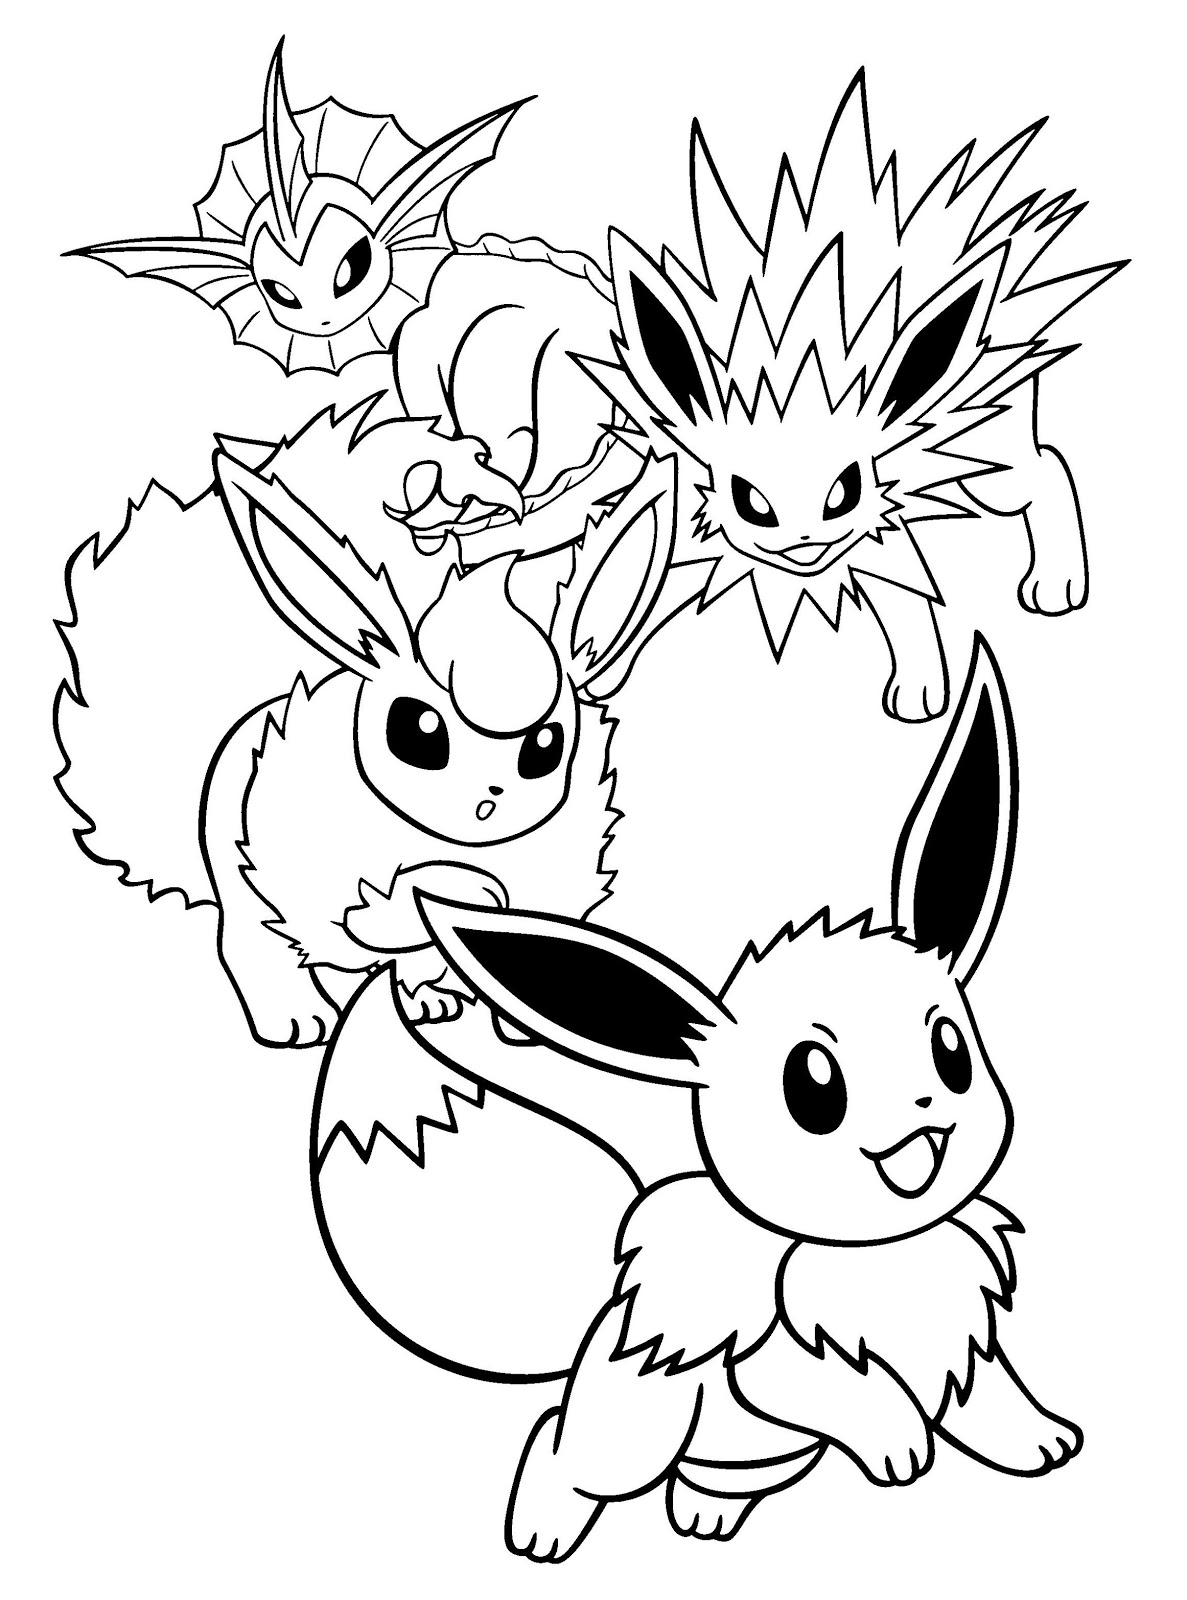 eevee-coloring-pages-printable-free-pokemon-coloring-pages